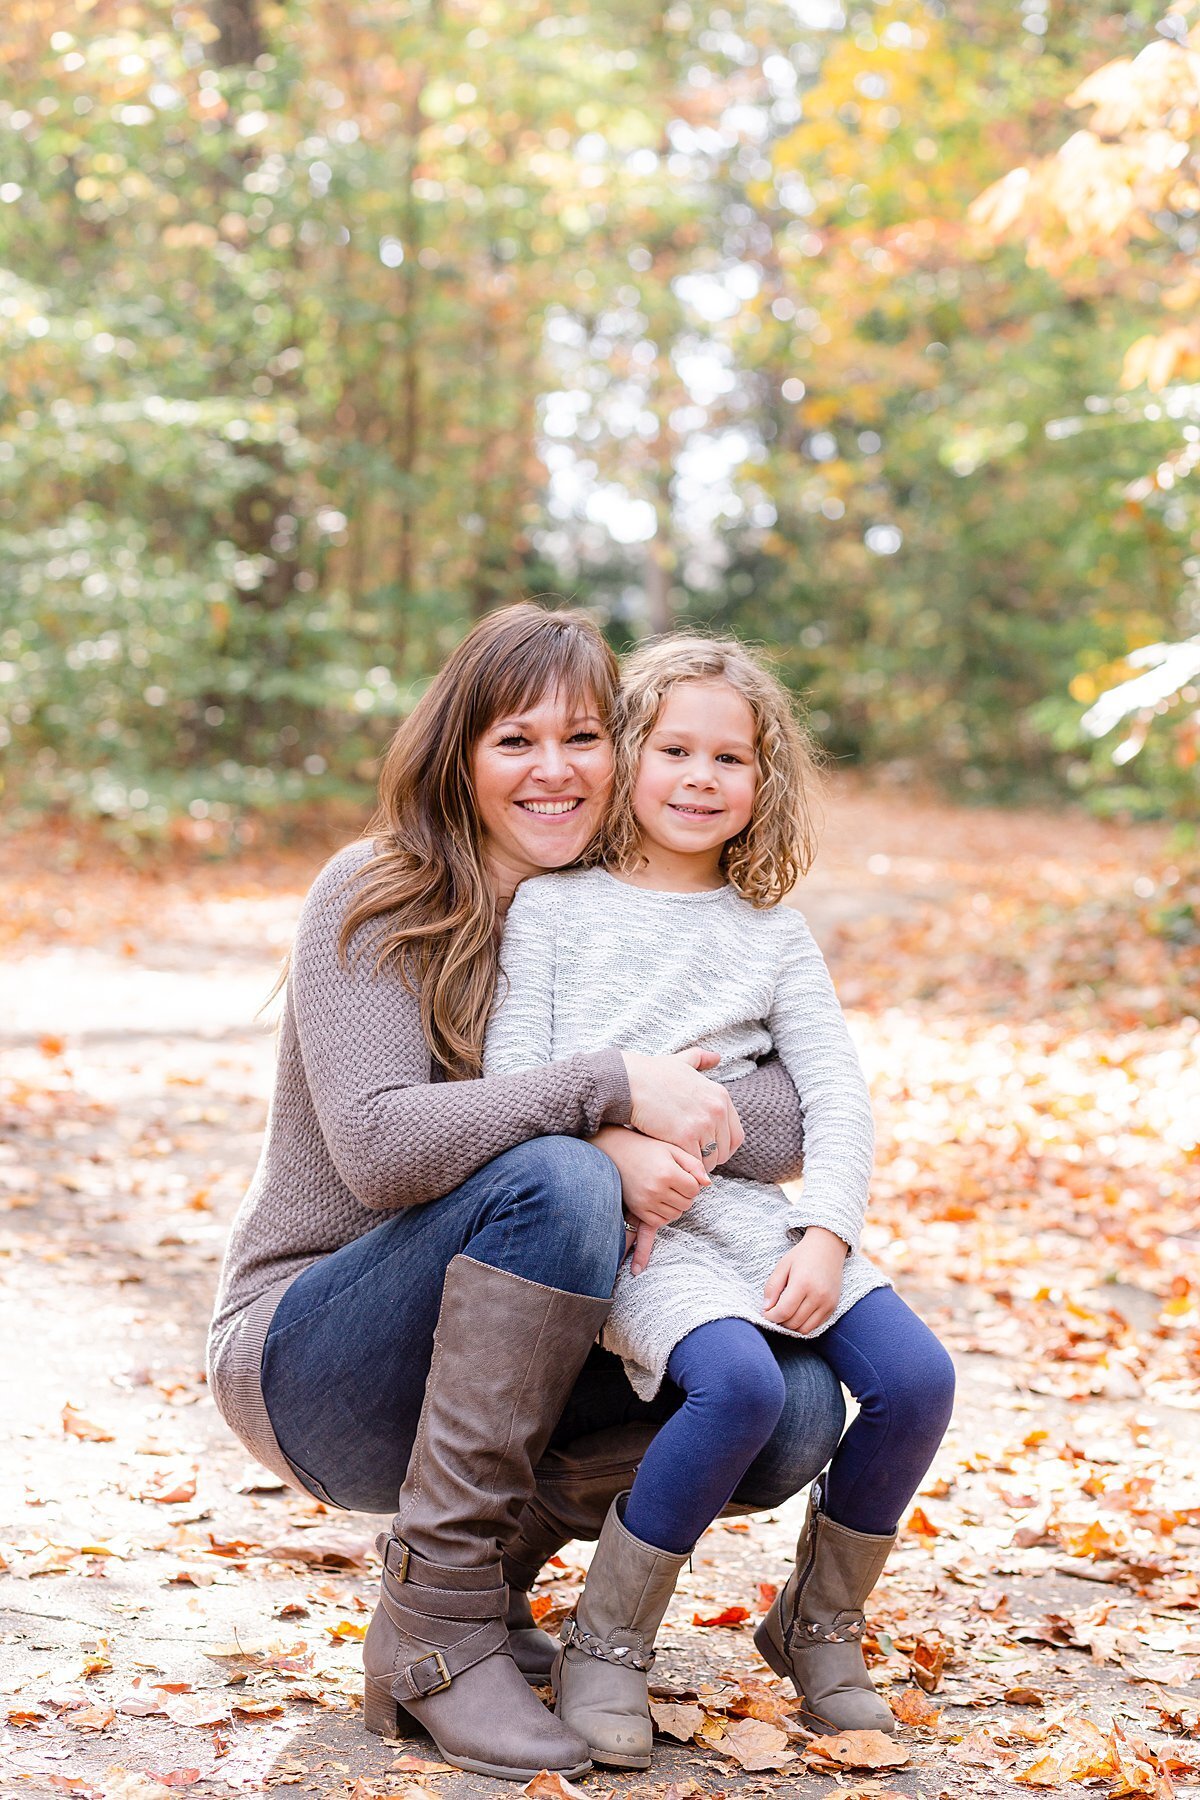 outdoor-fall-mini-sessions-cleveland-park-greenville-sc-9